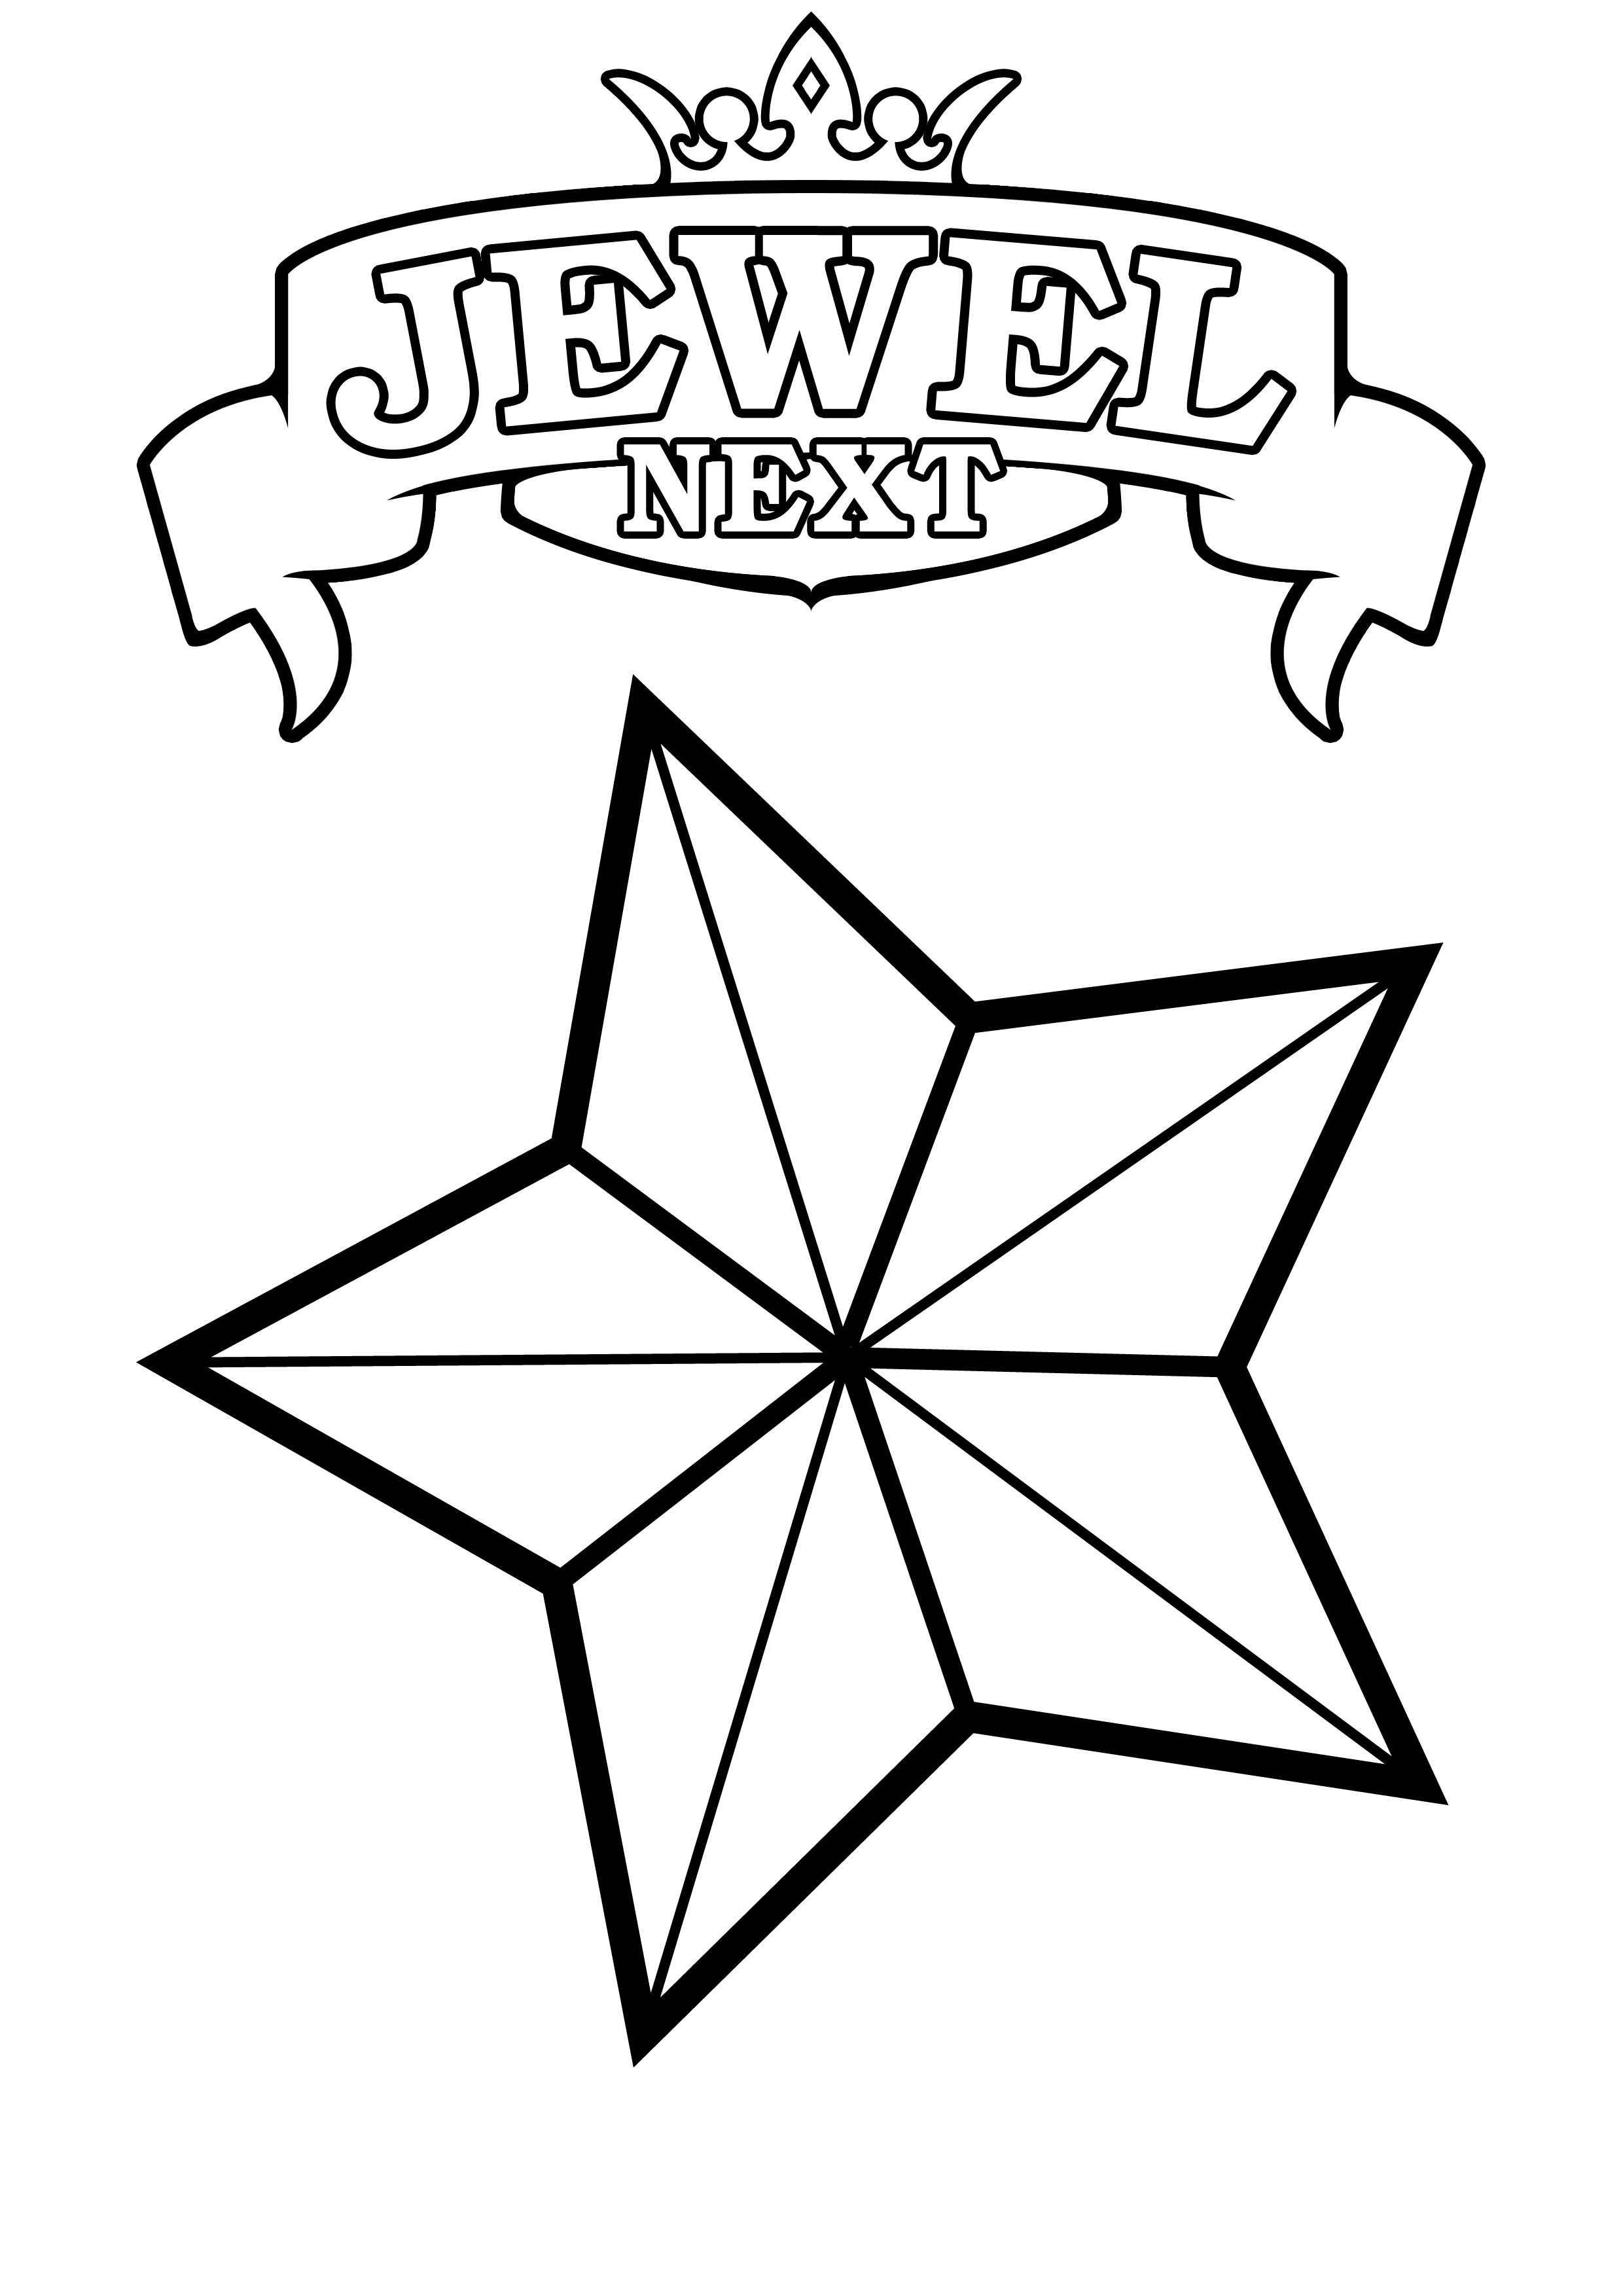 lovely twinkle twinkle little star coloring page